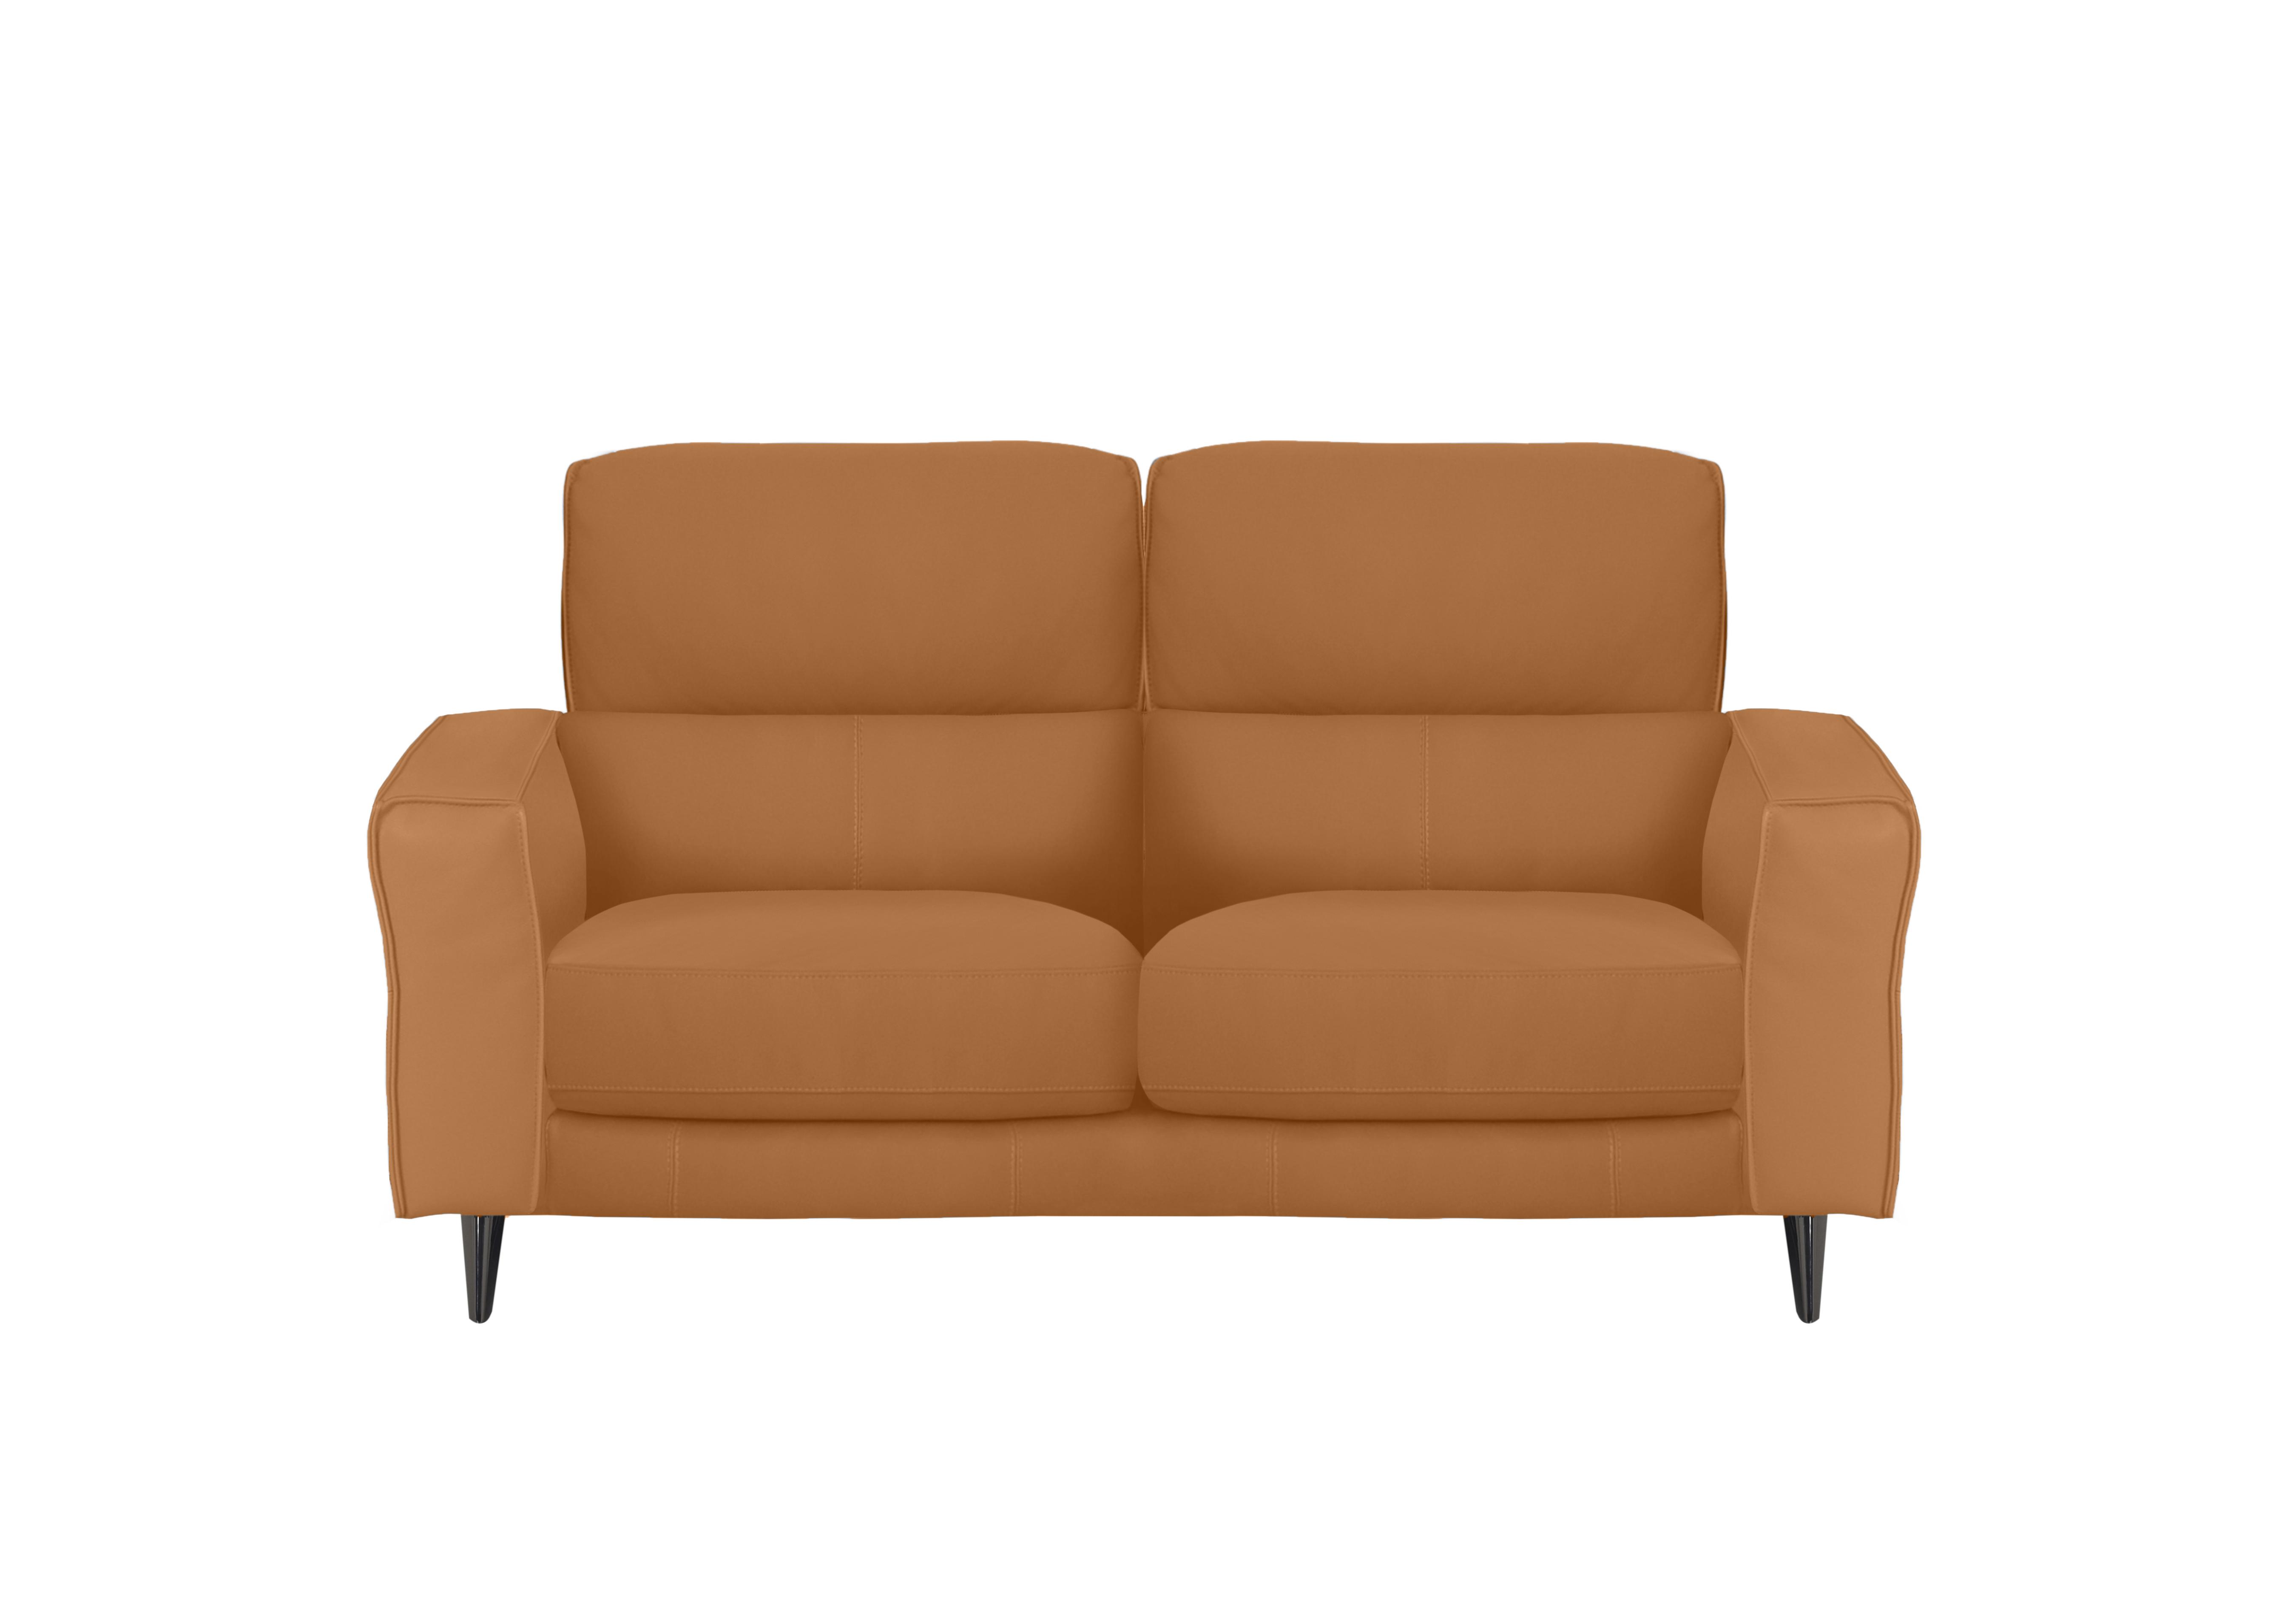 Axel 2 Seater Leather Sofa in Bv-335e Honey Yellow on Furniture Village